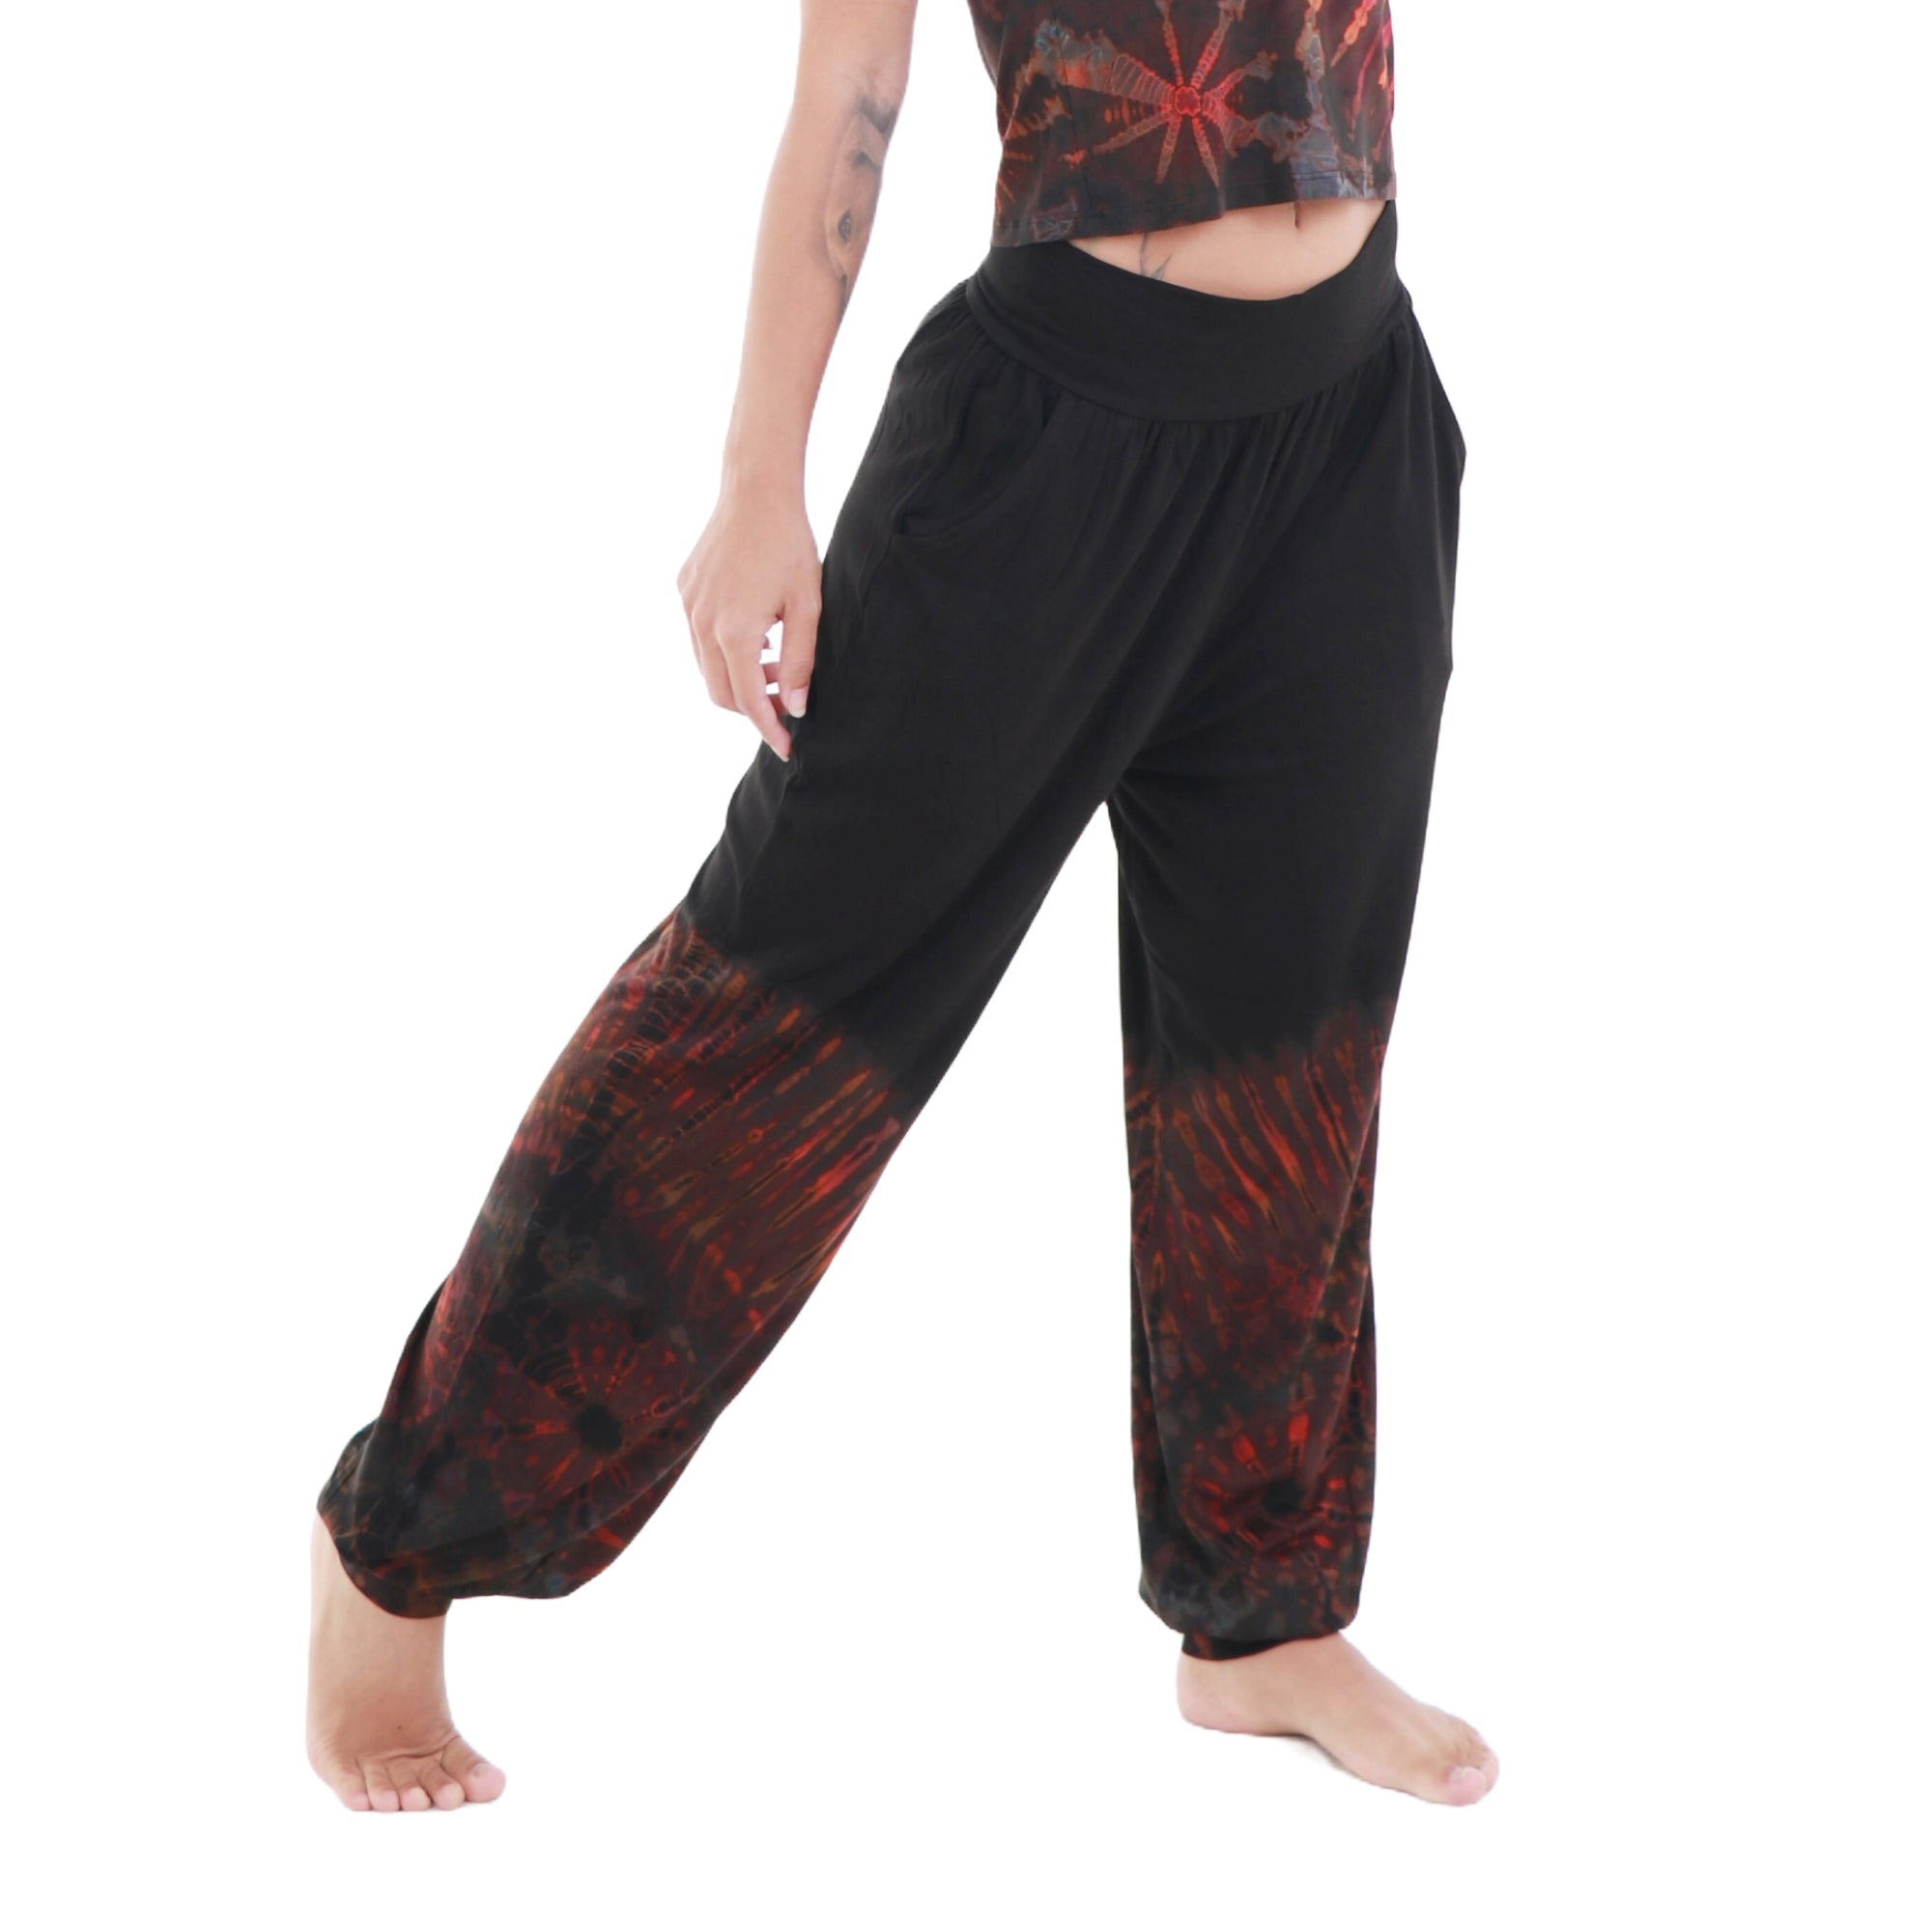 shop handmade harem pants at malisun! one size fits most | half tie-dye colors collection